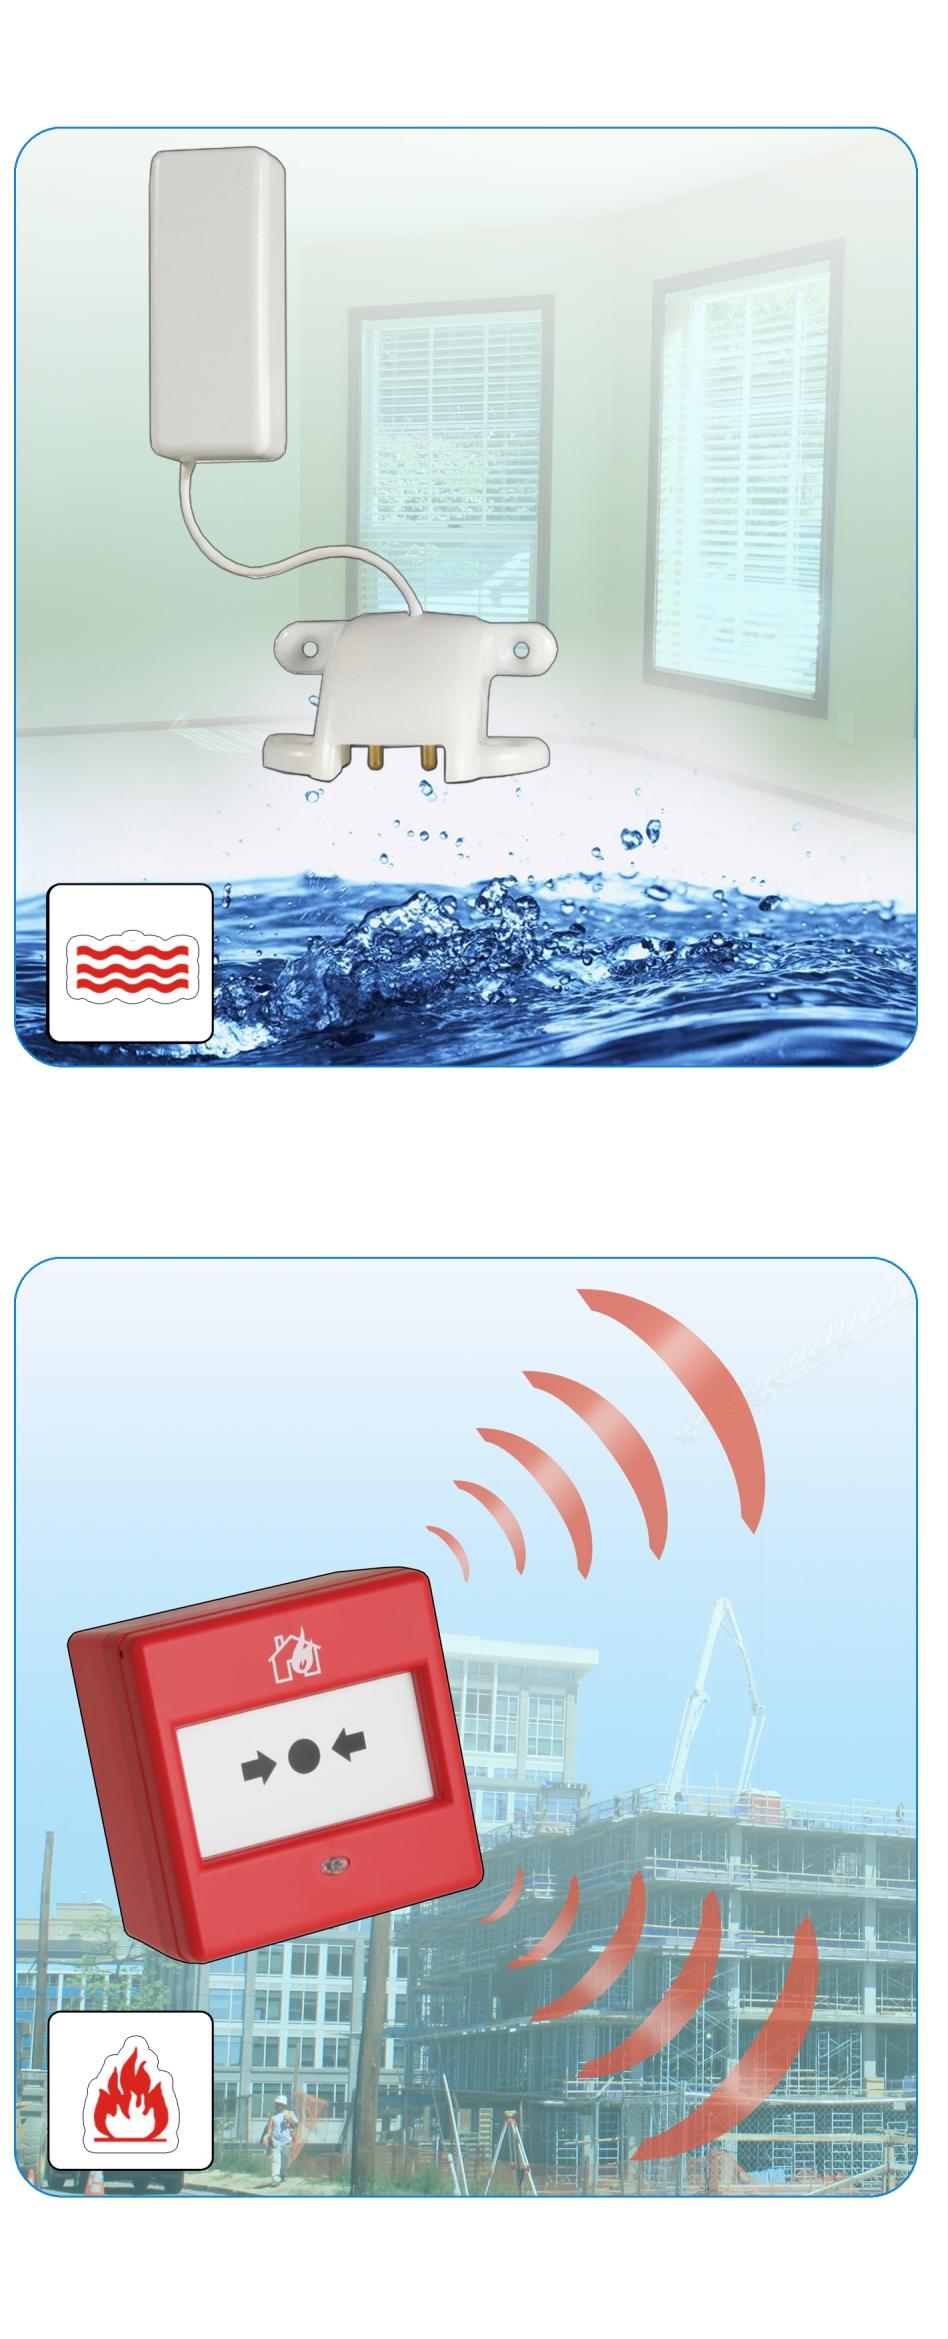 Flood Sensor Our ﬂood sensor can detect water leakage from piping, natural ﬂooding or any other water source.